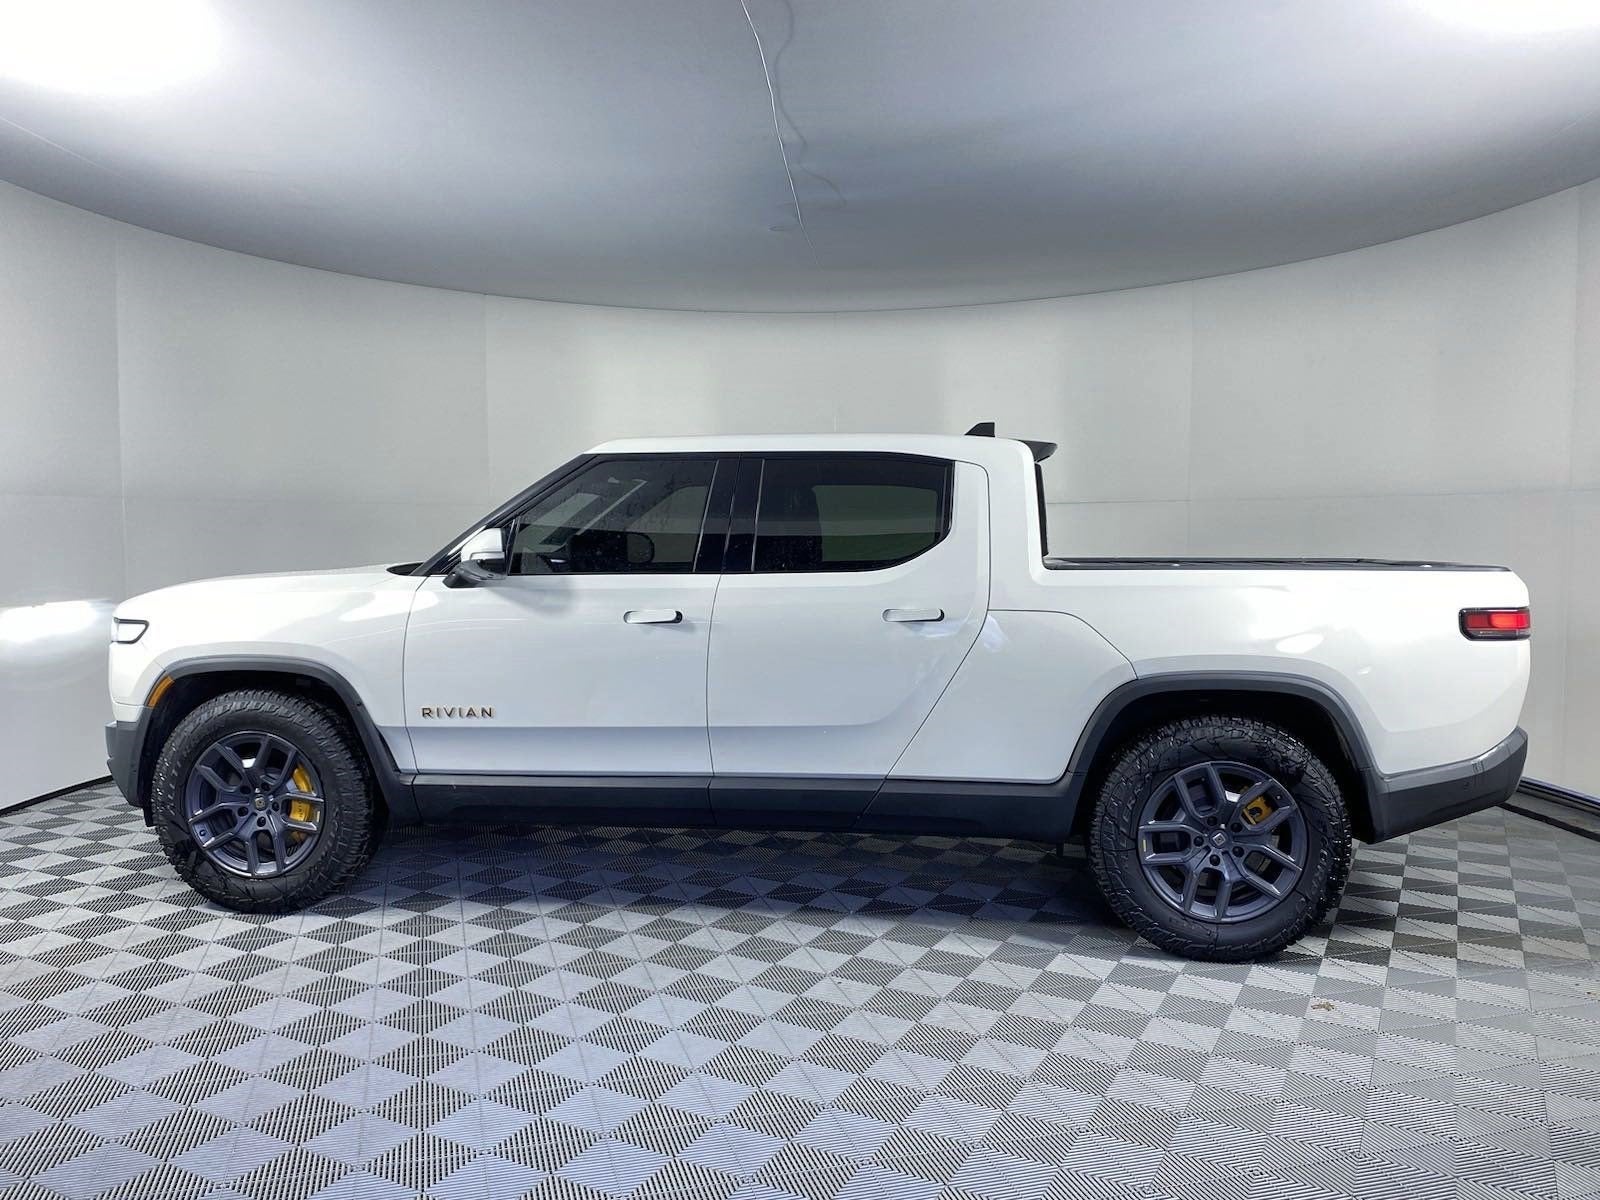 Used 2022 Rivian R1T Adventure with VIN 7FCTGAAA2NN009034 for sale in Canby, OR